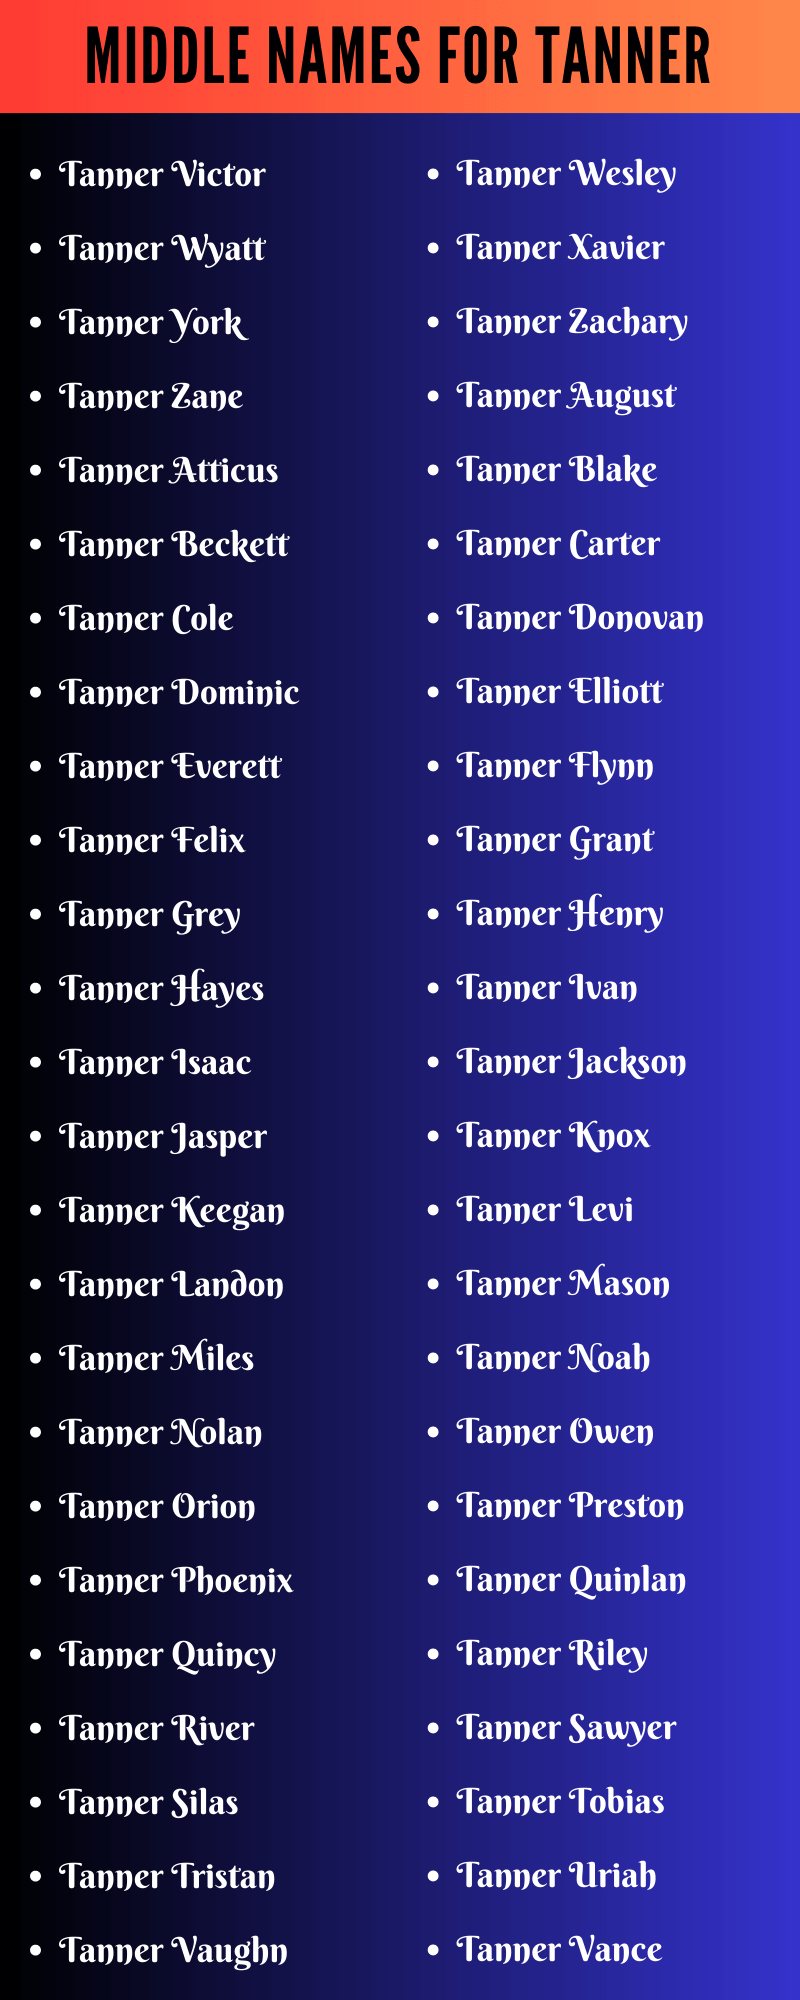 Middle Names For Tanner